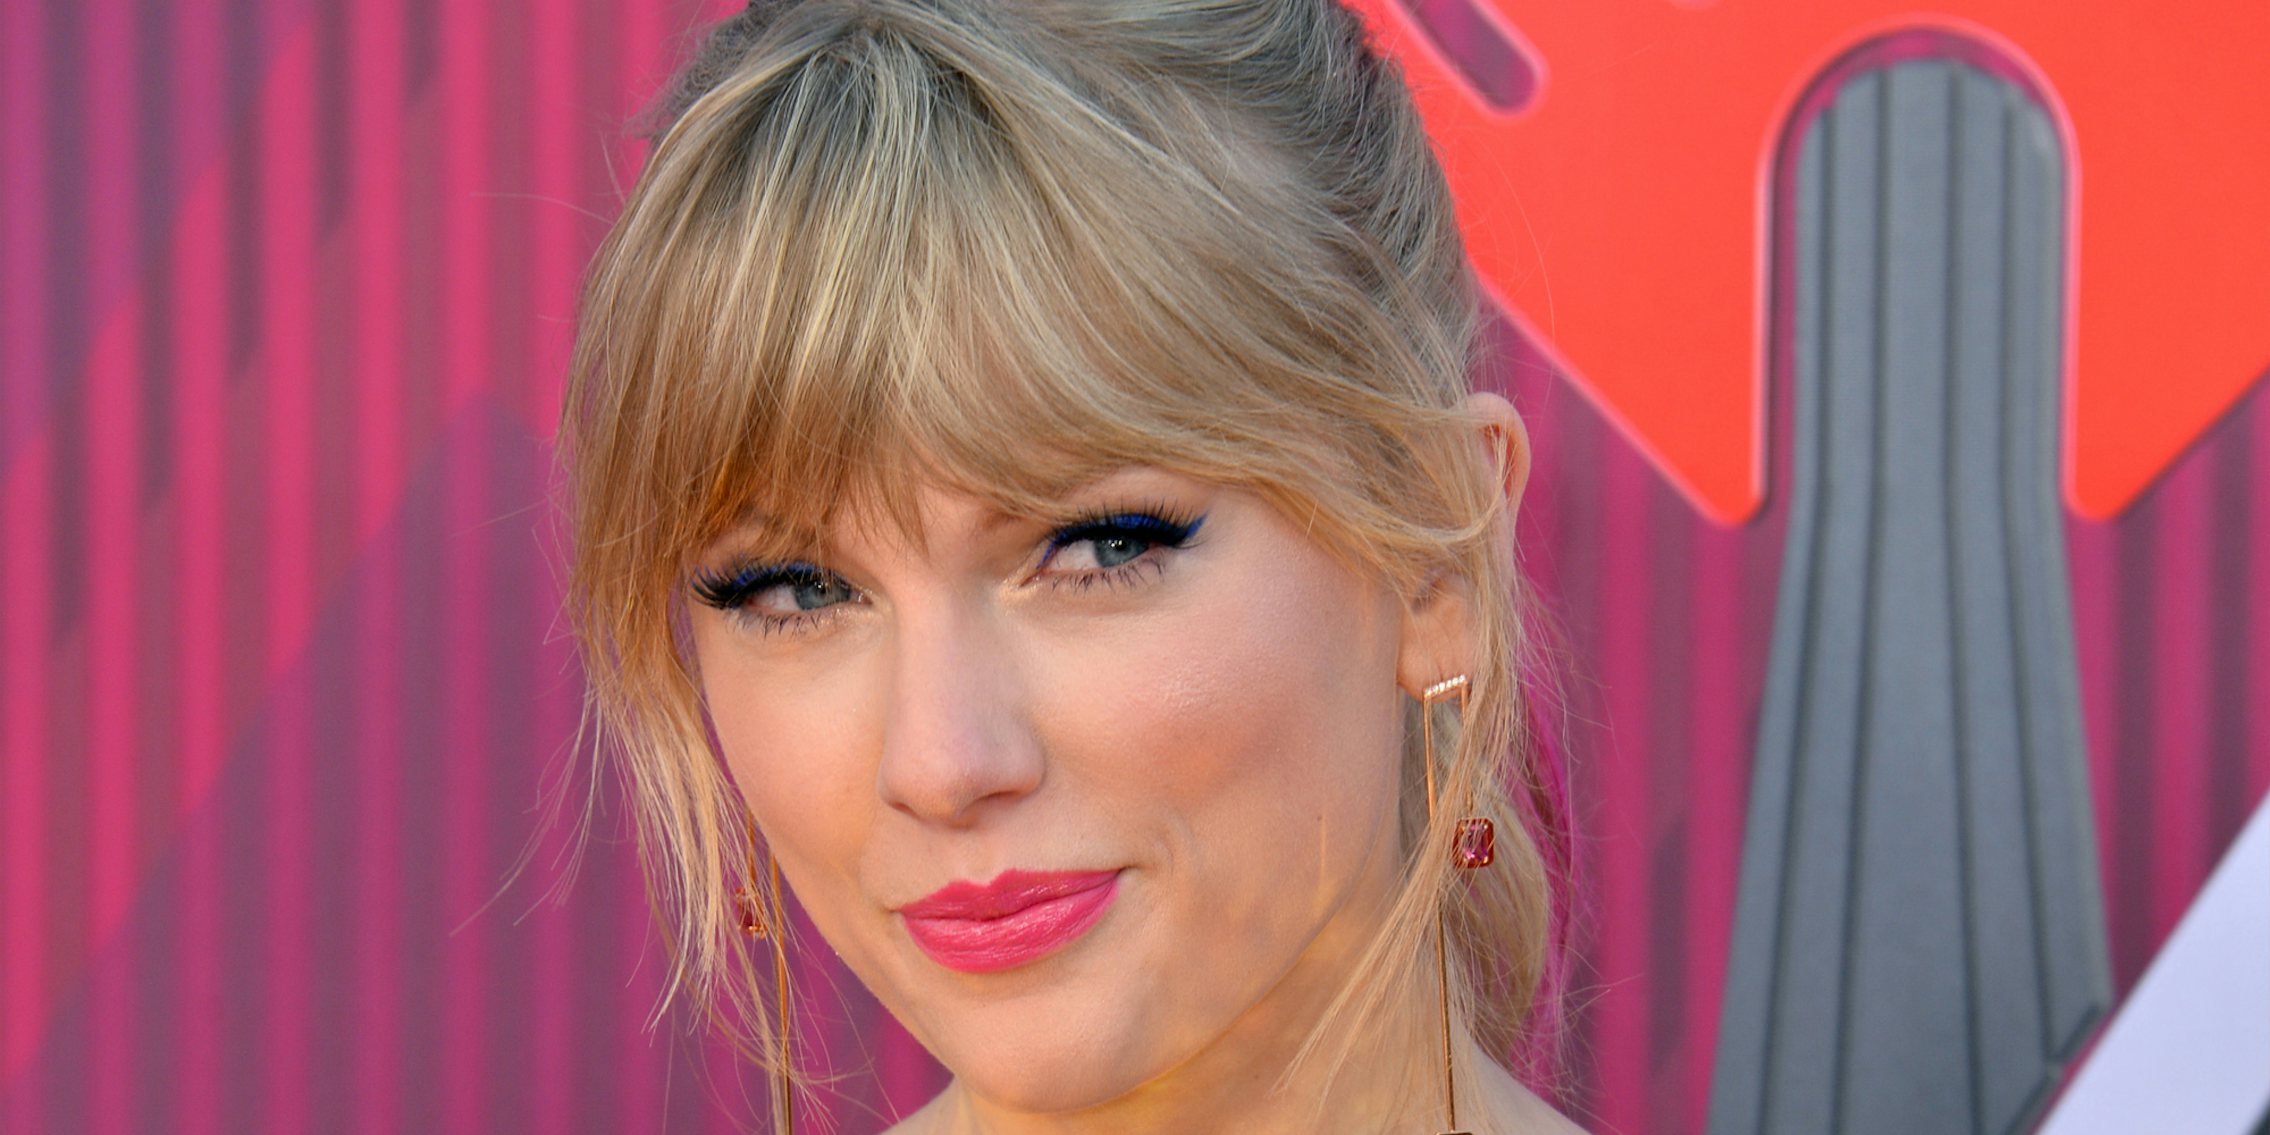 Taylor Swift in front of pink and grey stripe background